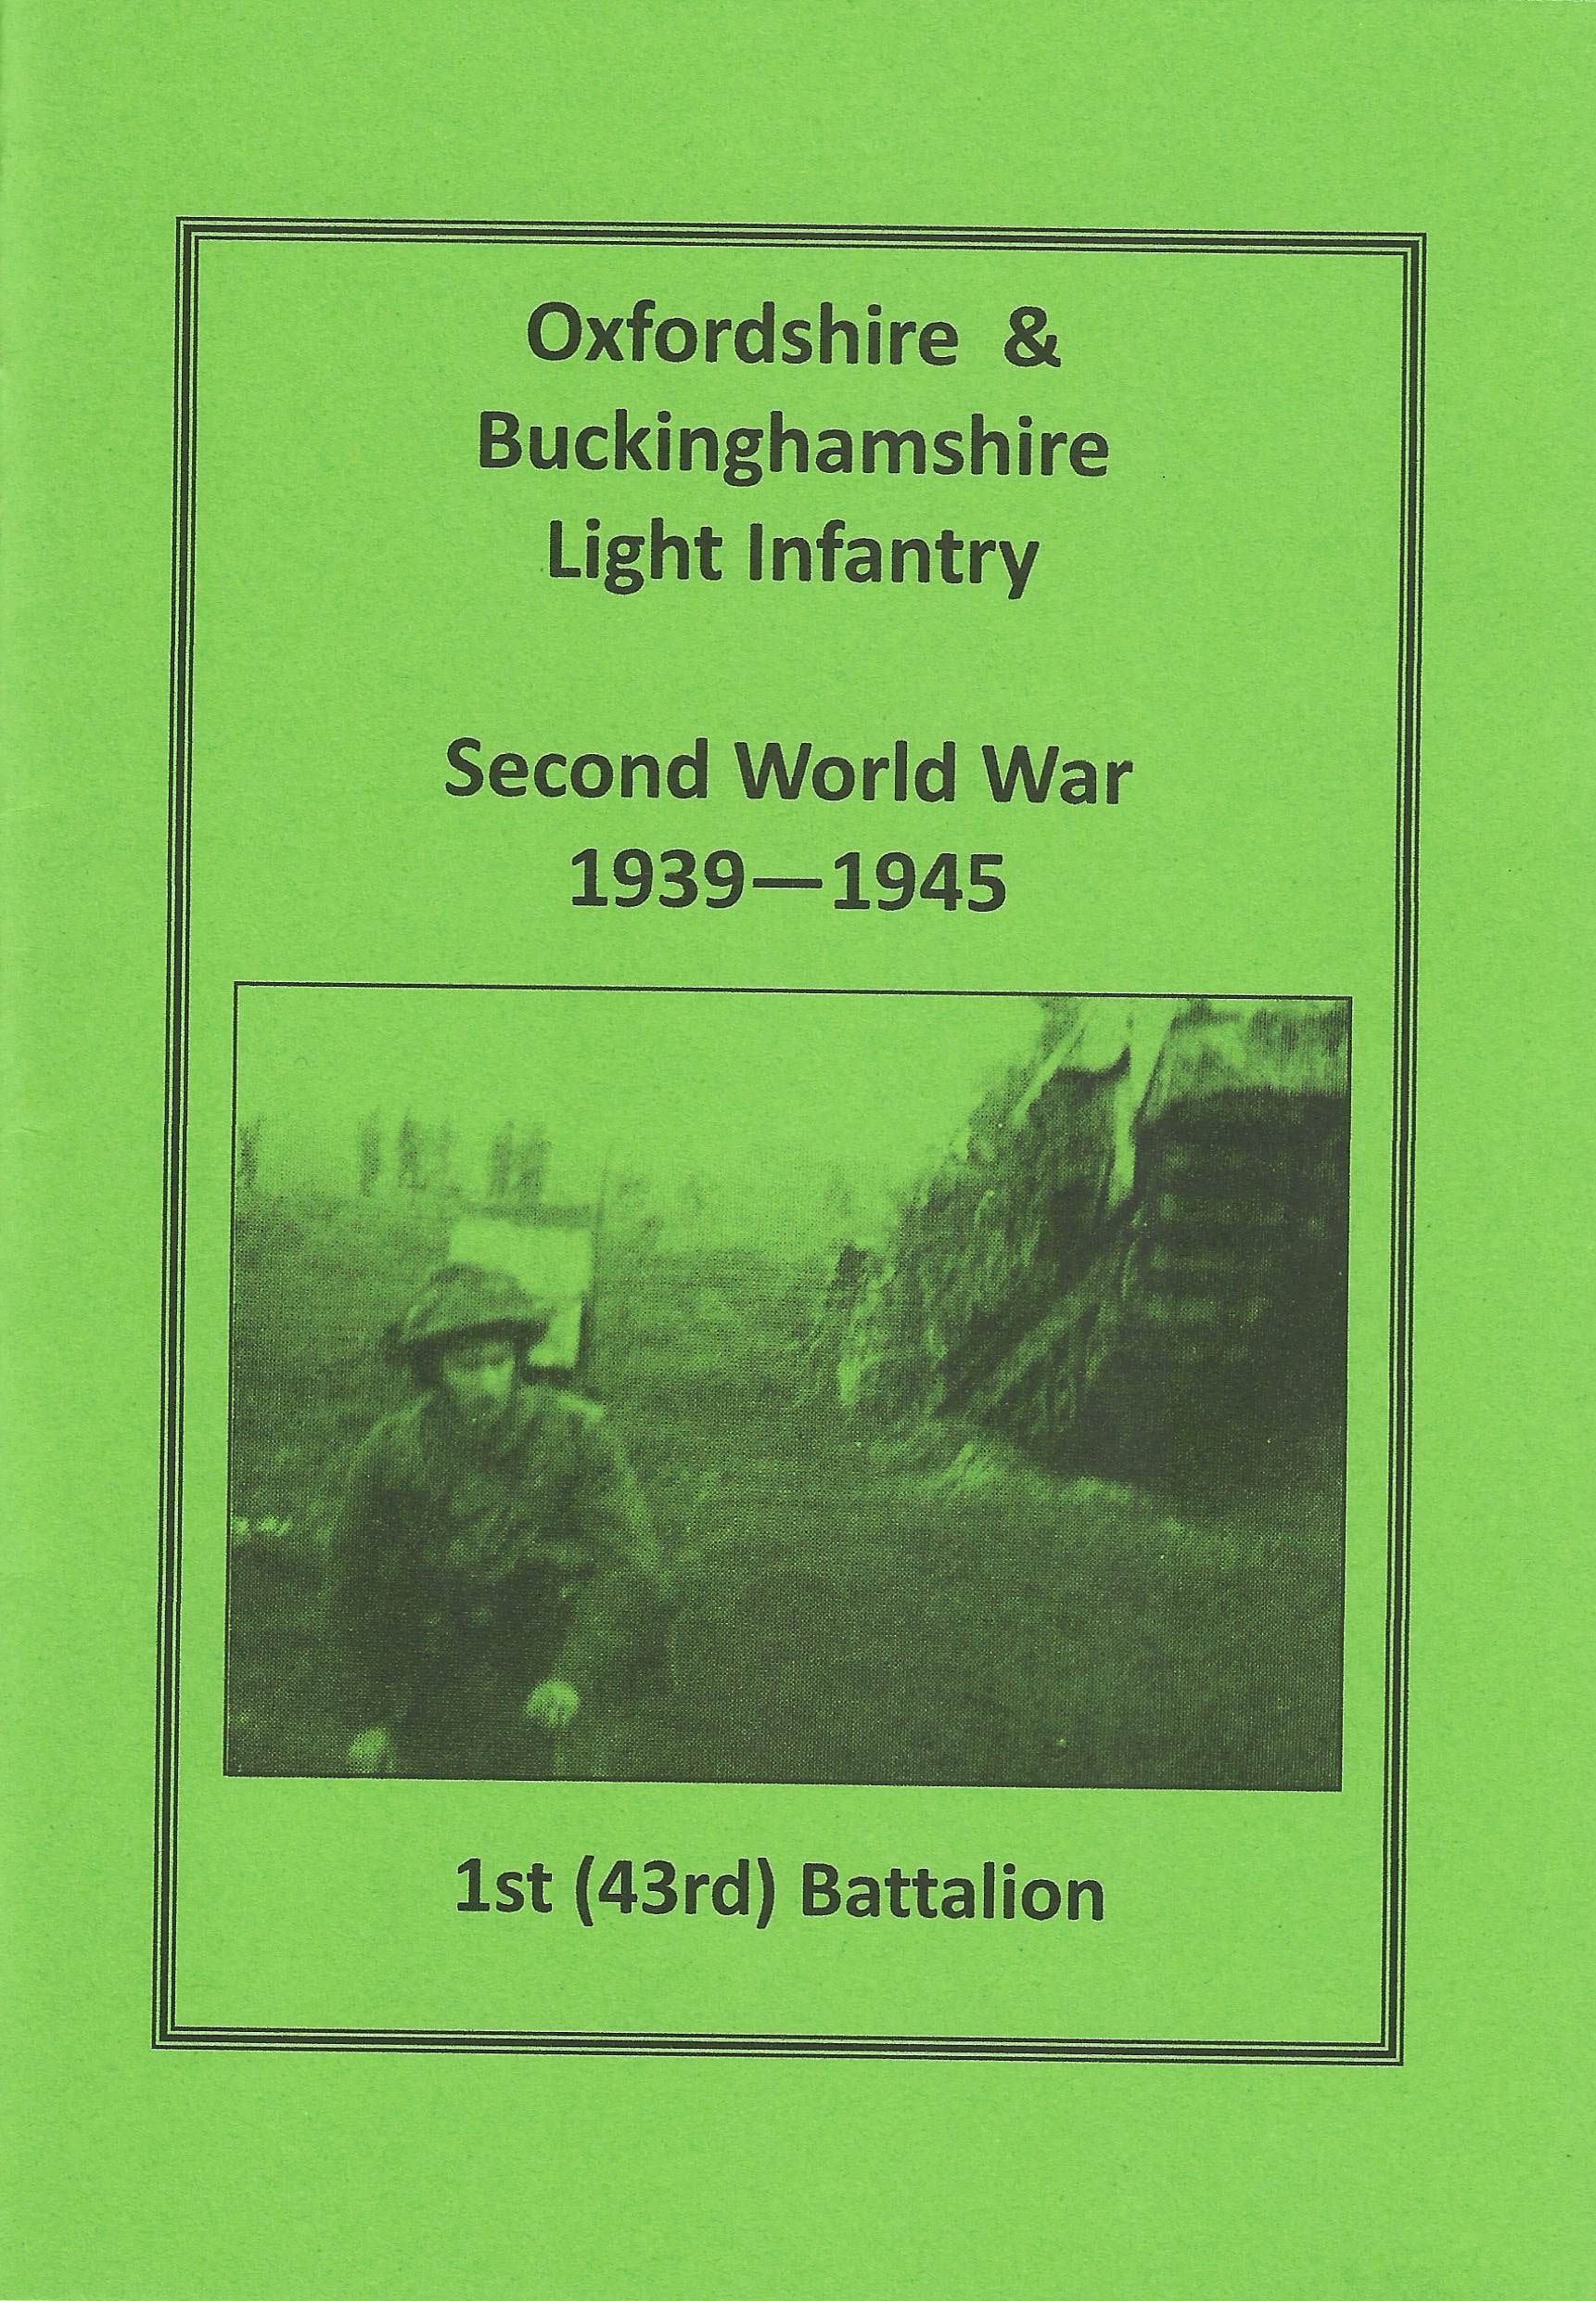 Oxfordshire and Buckinghamshire Light Infantry in WW2: 1st (43rd) Battalion